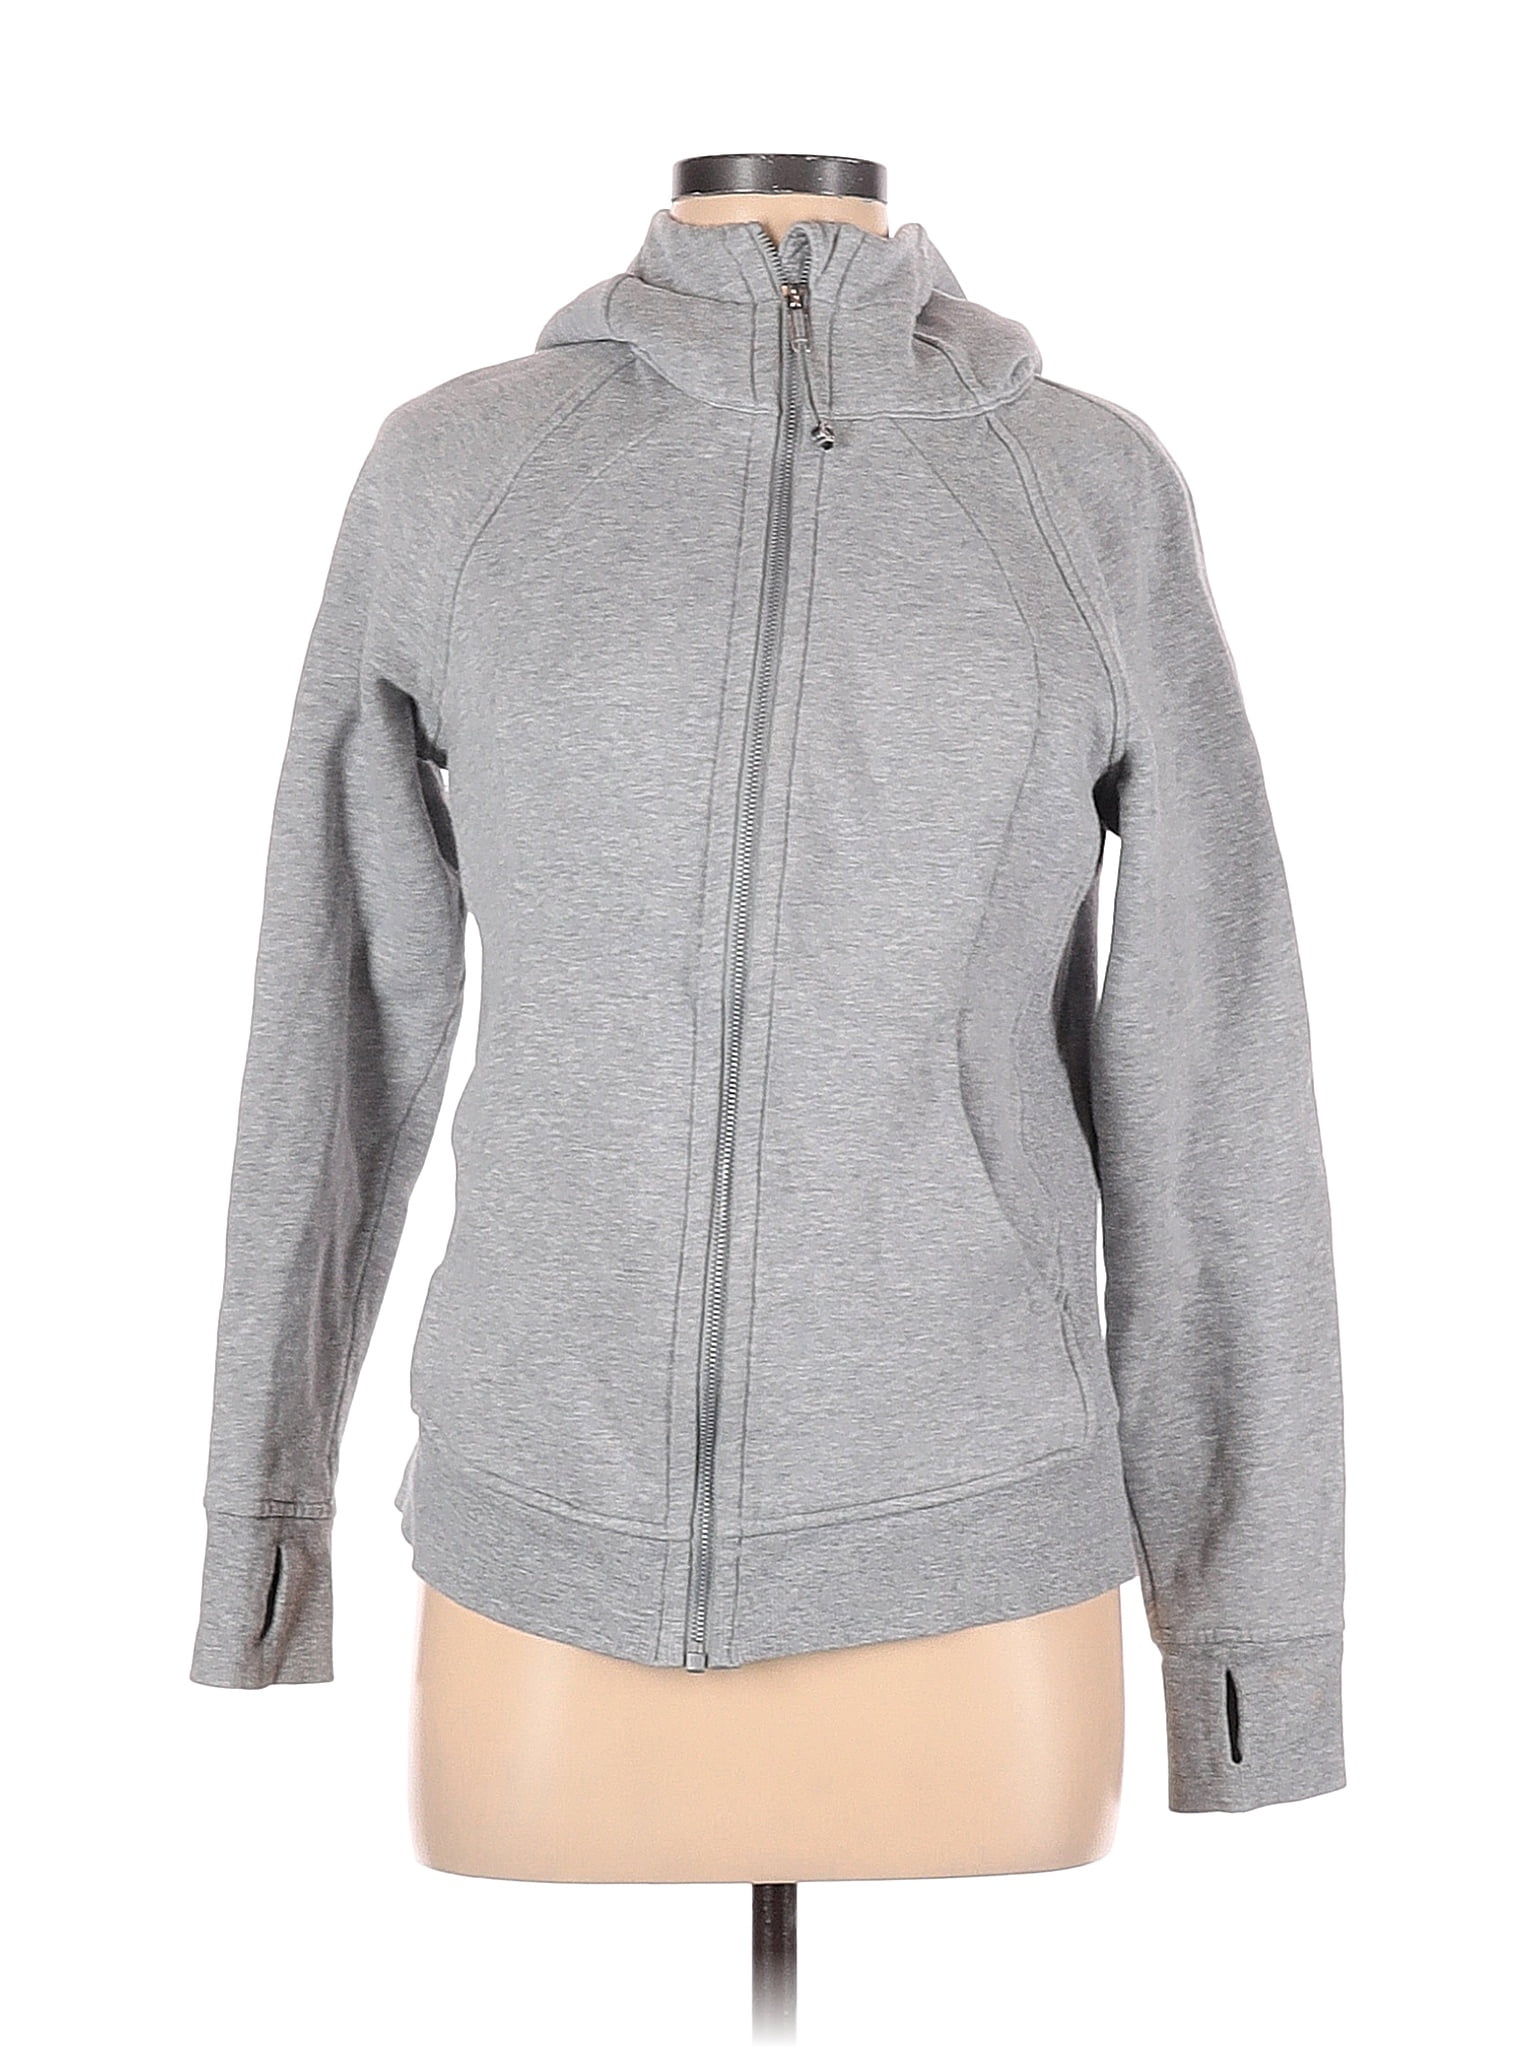 Lululemon Athletica Solid Gray Zip Up Hoodie Size 8 - 47% off